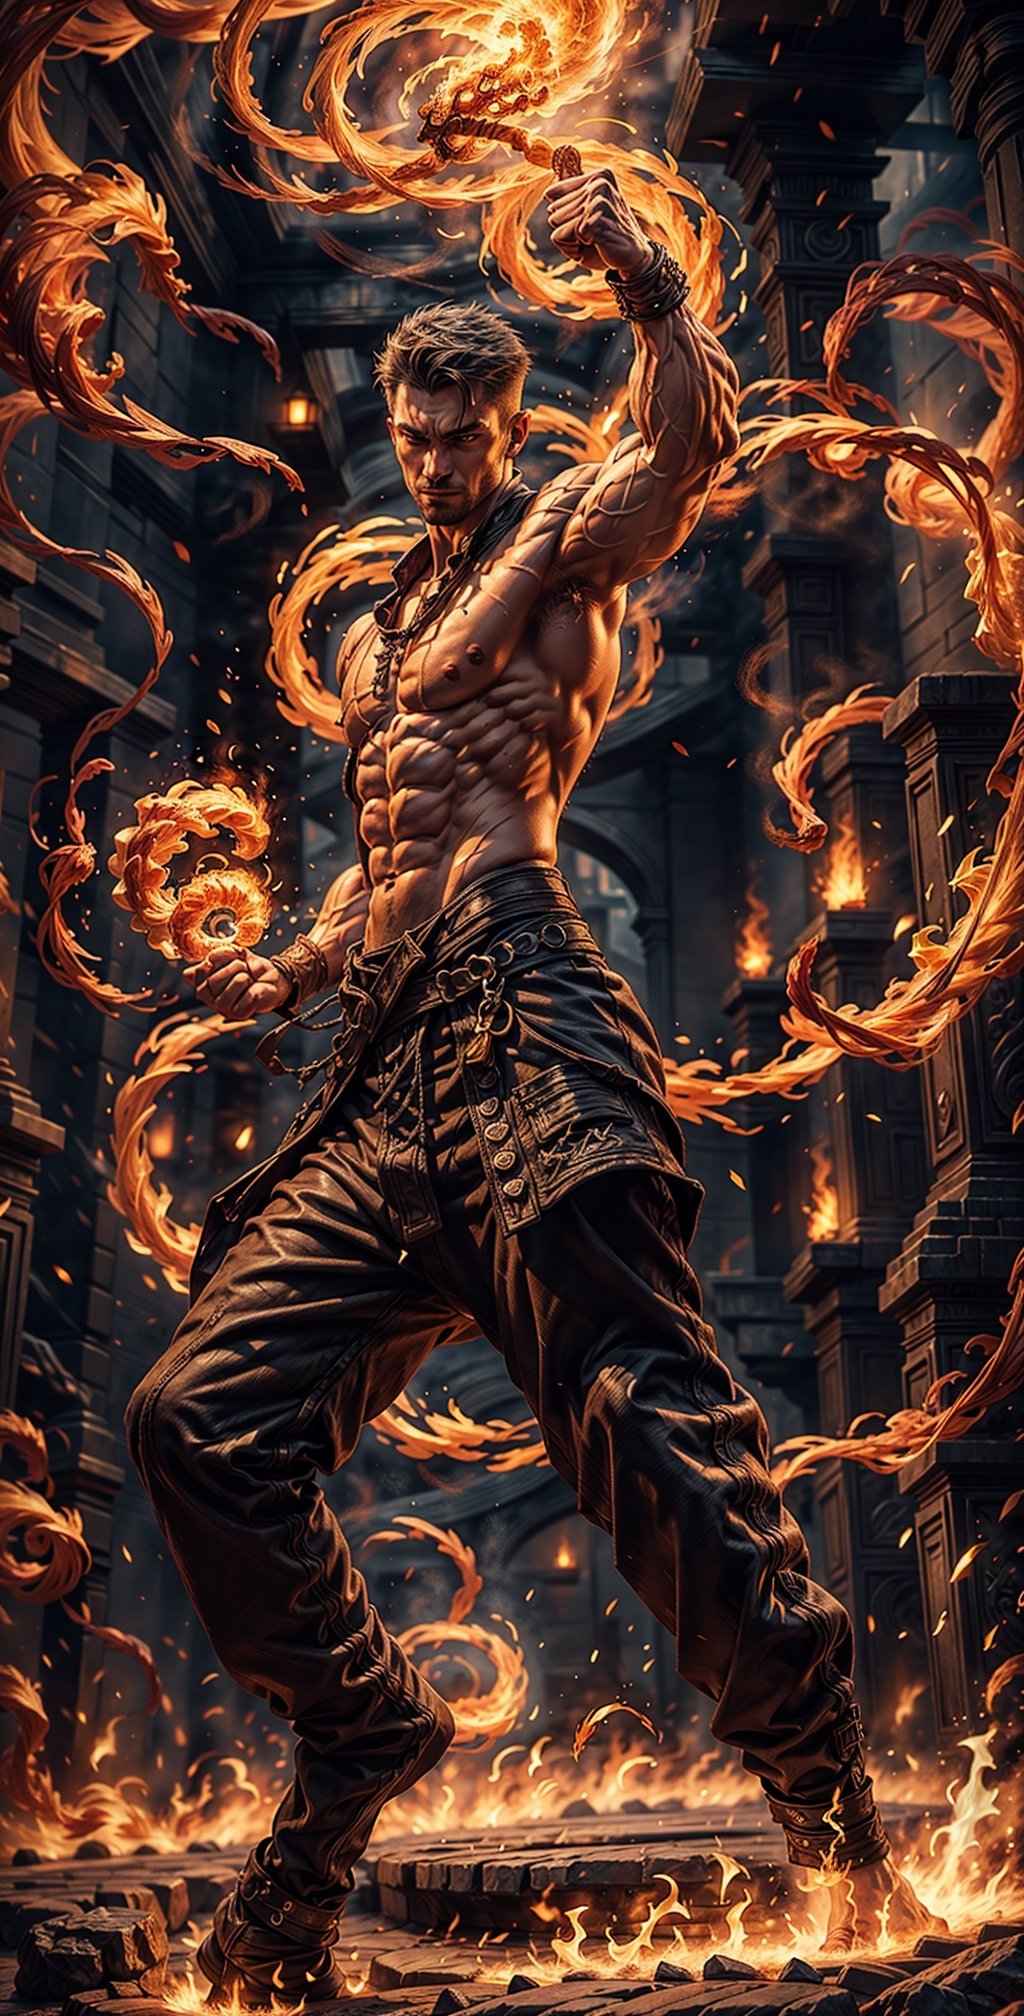 "Craft an image in an anime fantasy world style, depicting a lithe, muscular man with his fist ablaze in magical fire. Surround the burning fist with swirling black smoke, creating a captivating and dynamic scene that showcases his power and mastery of magic.",Sexy Muscular